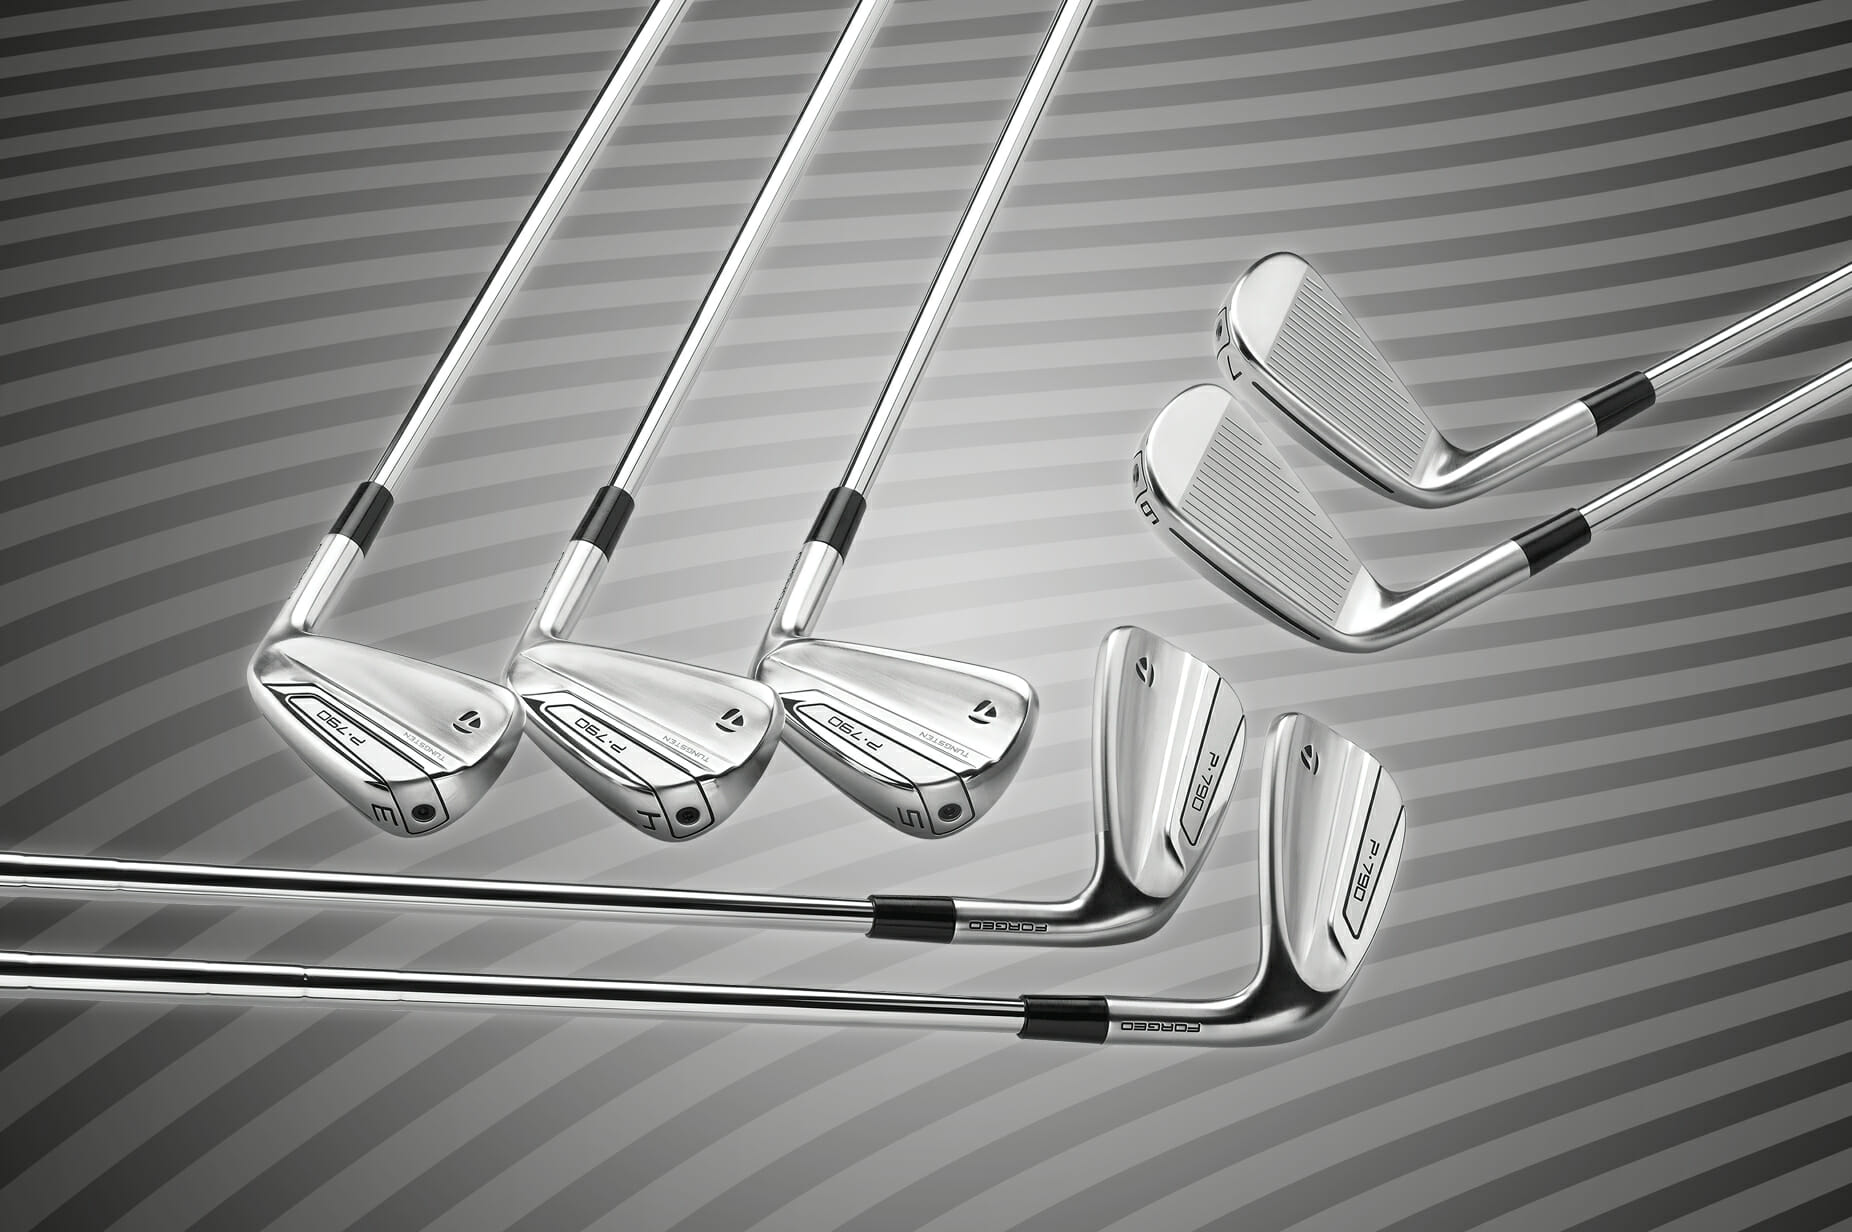 TaylorMade update popular P790 iron – A distance iron for the better player